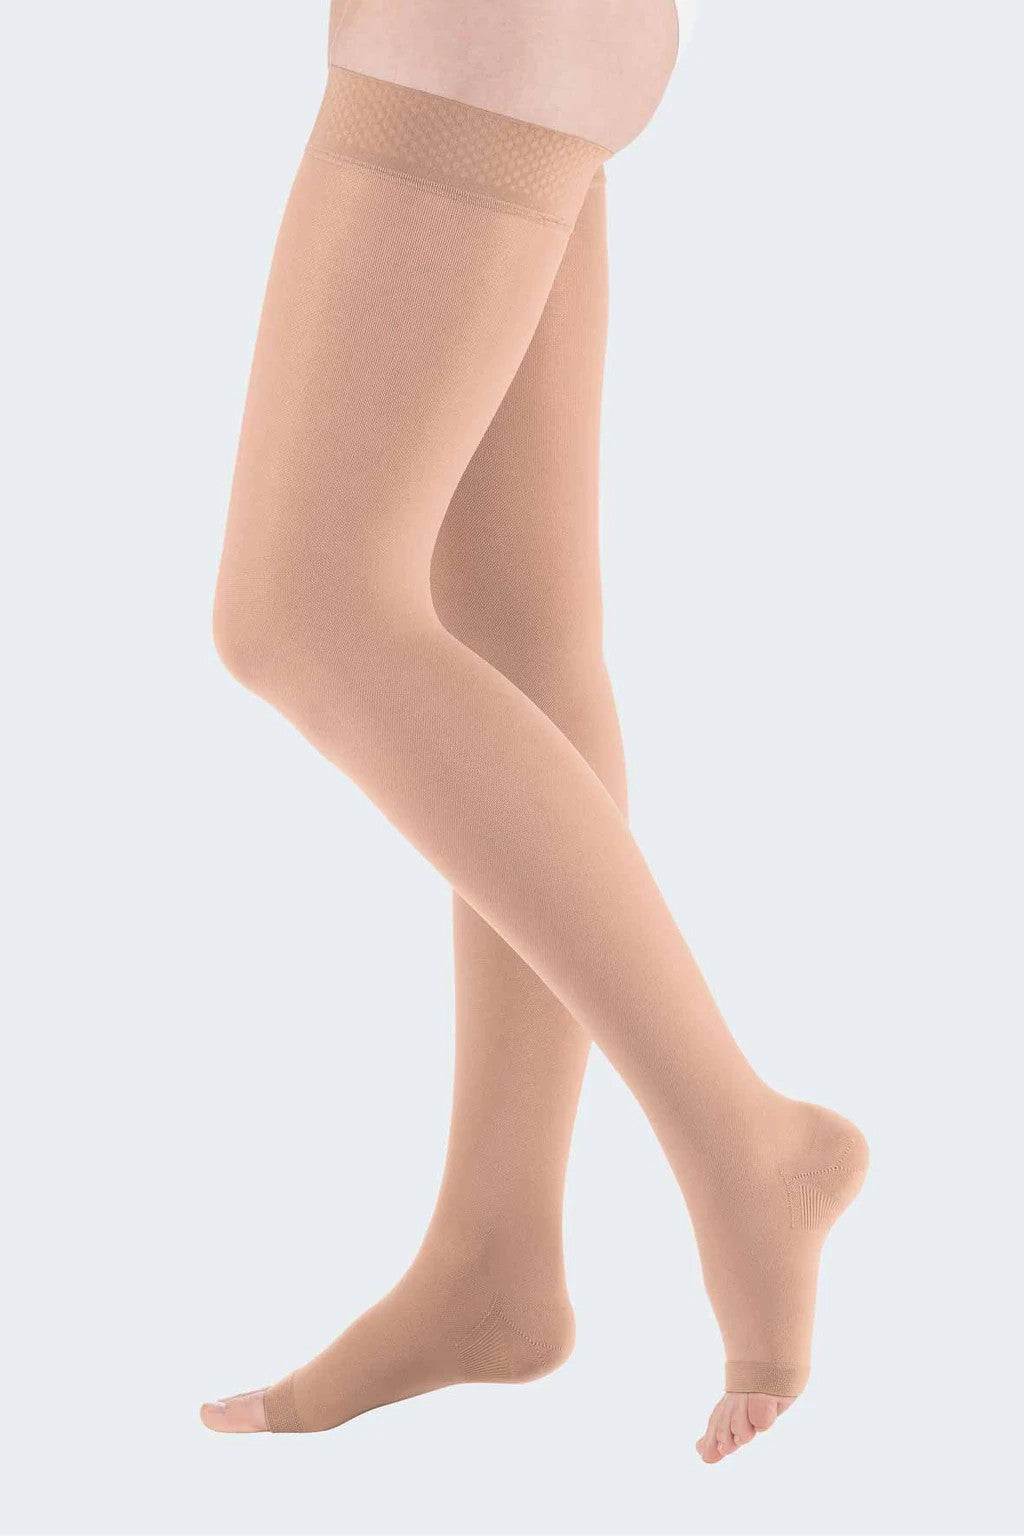 Medi Duomed Open-Toe Thigh High Compression Stockings - CCL 1 (18-21 MMHG)  / Small